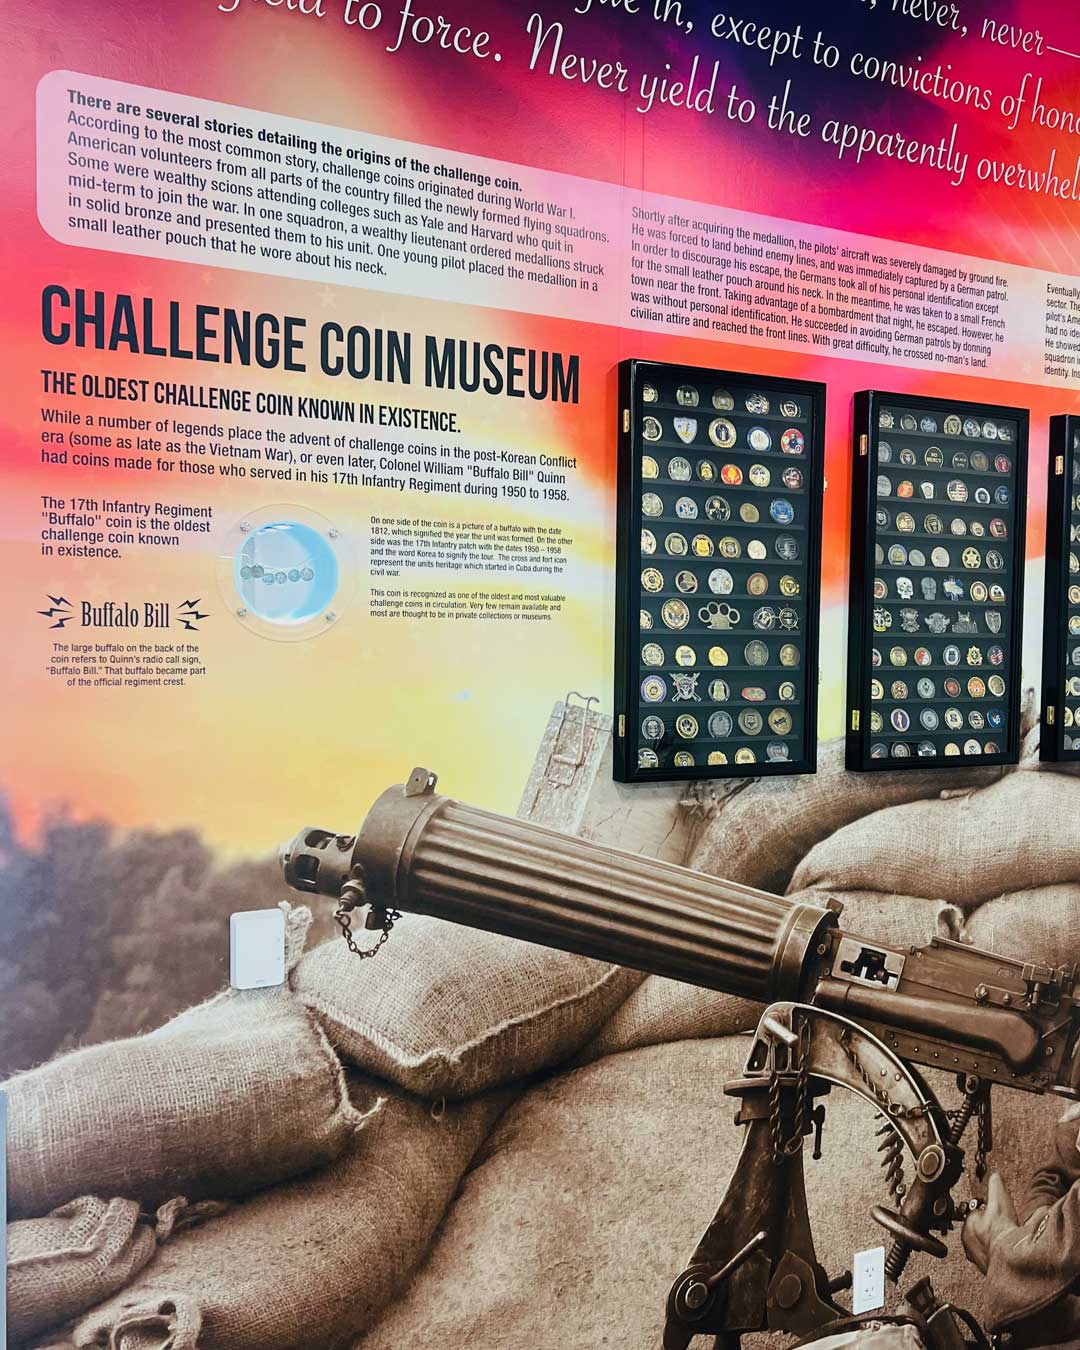 Challenge Coin Museum - Gun For Hire